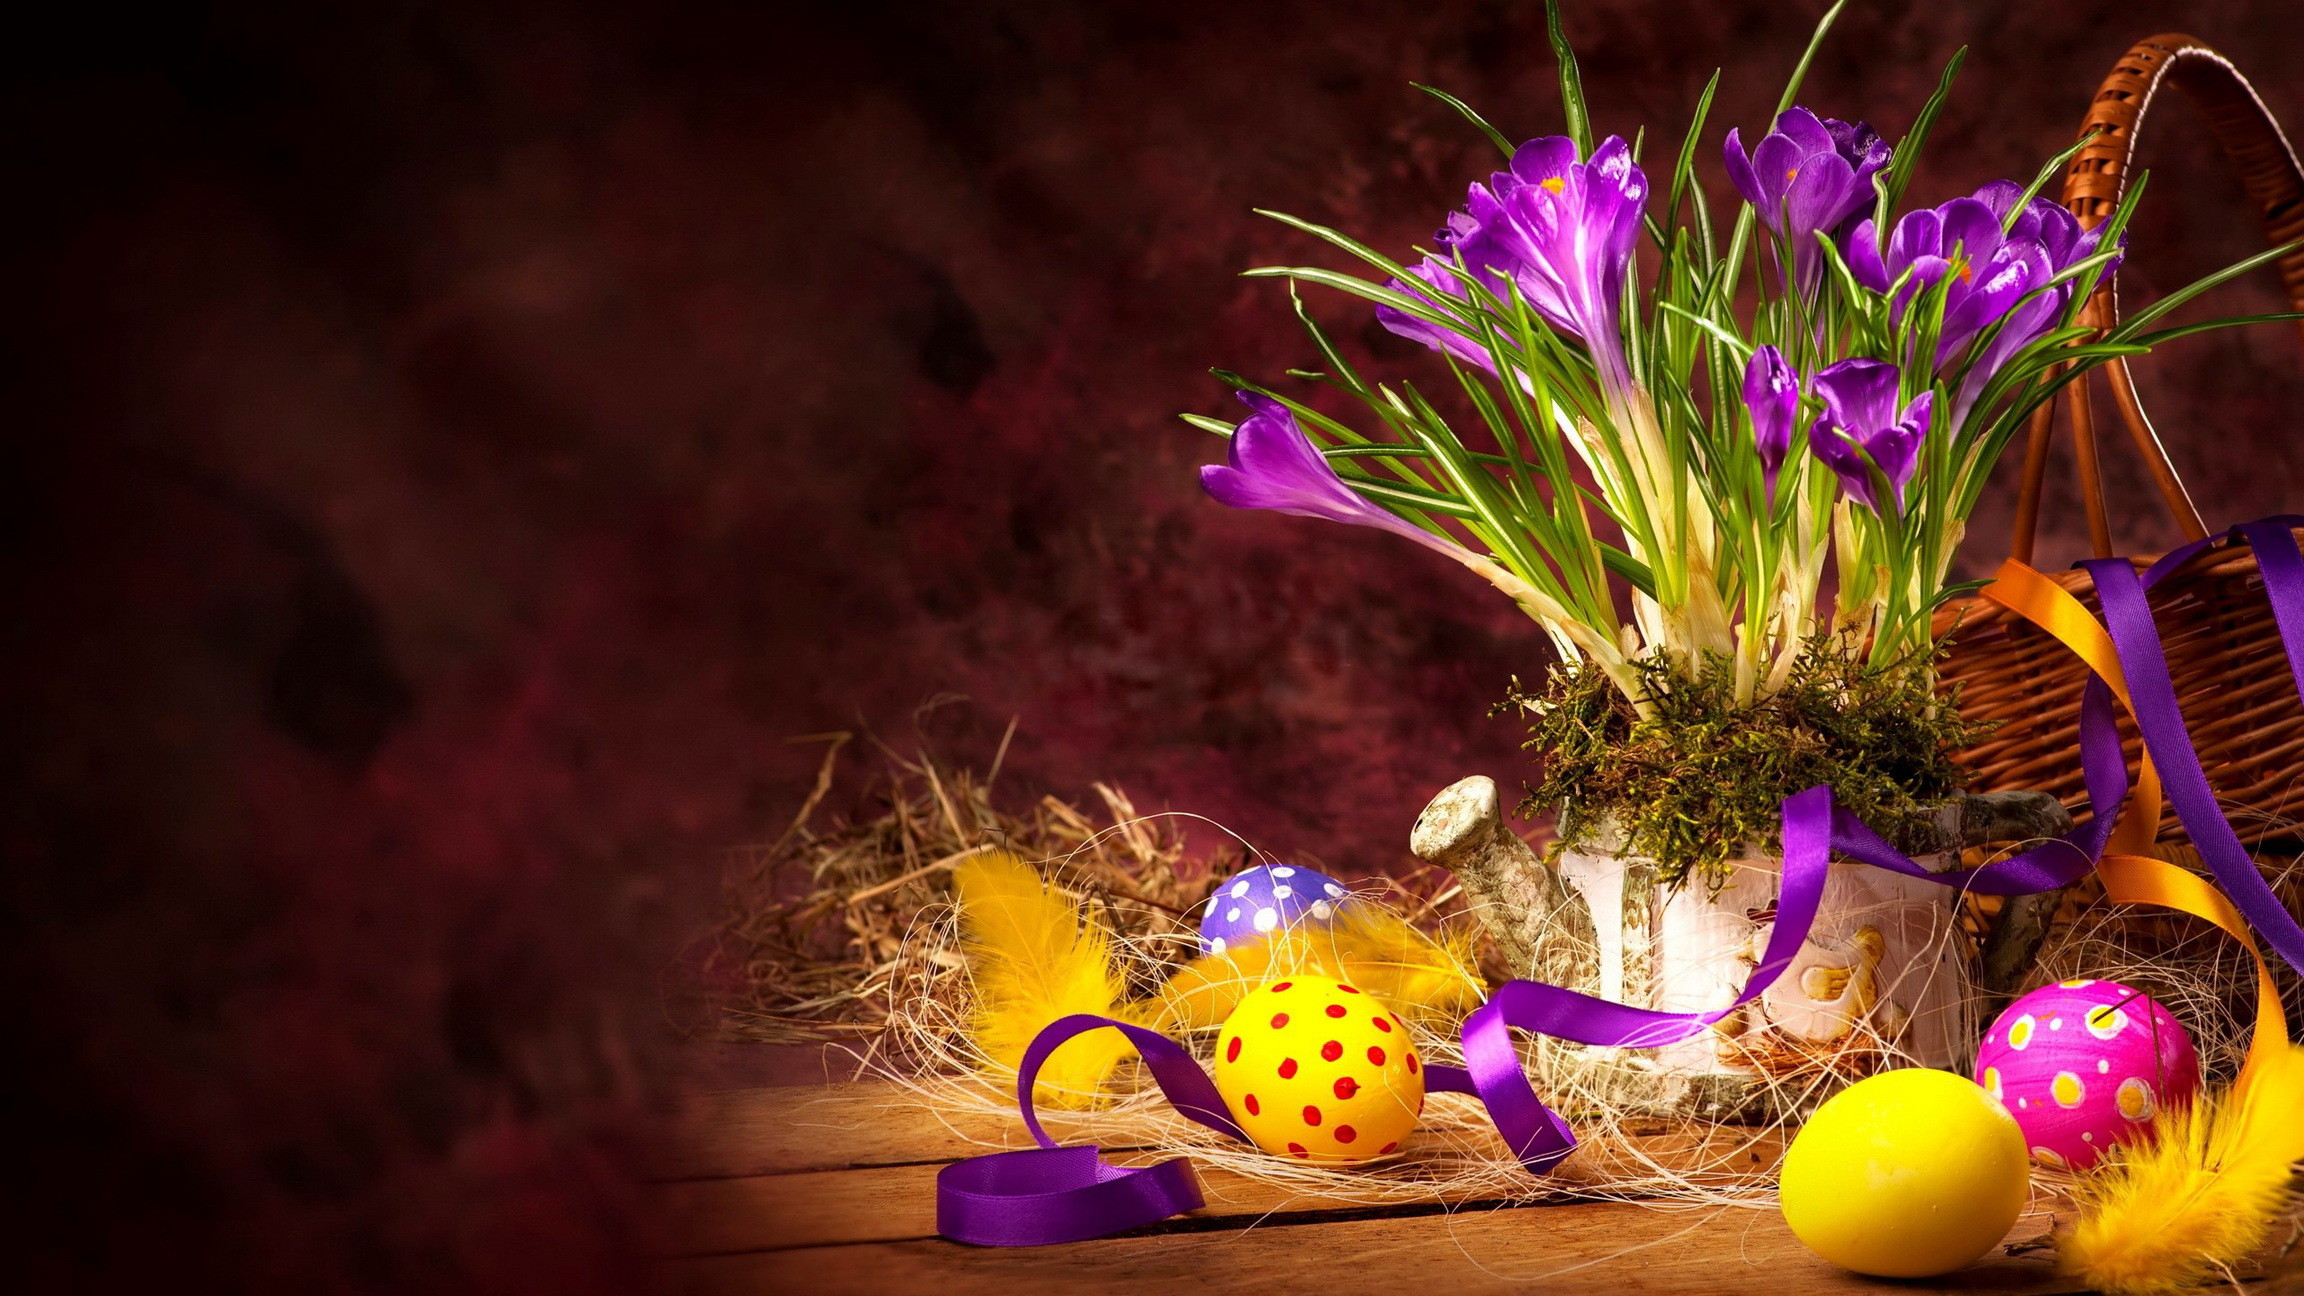 2304x1296 Easter Desktop Backgrounds | One HD Wallpaper Pictures .